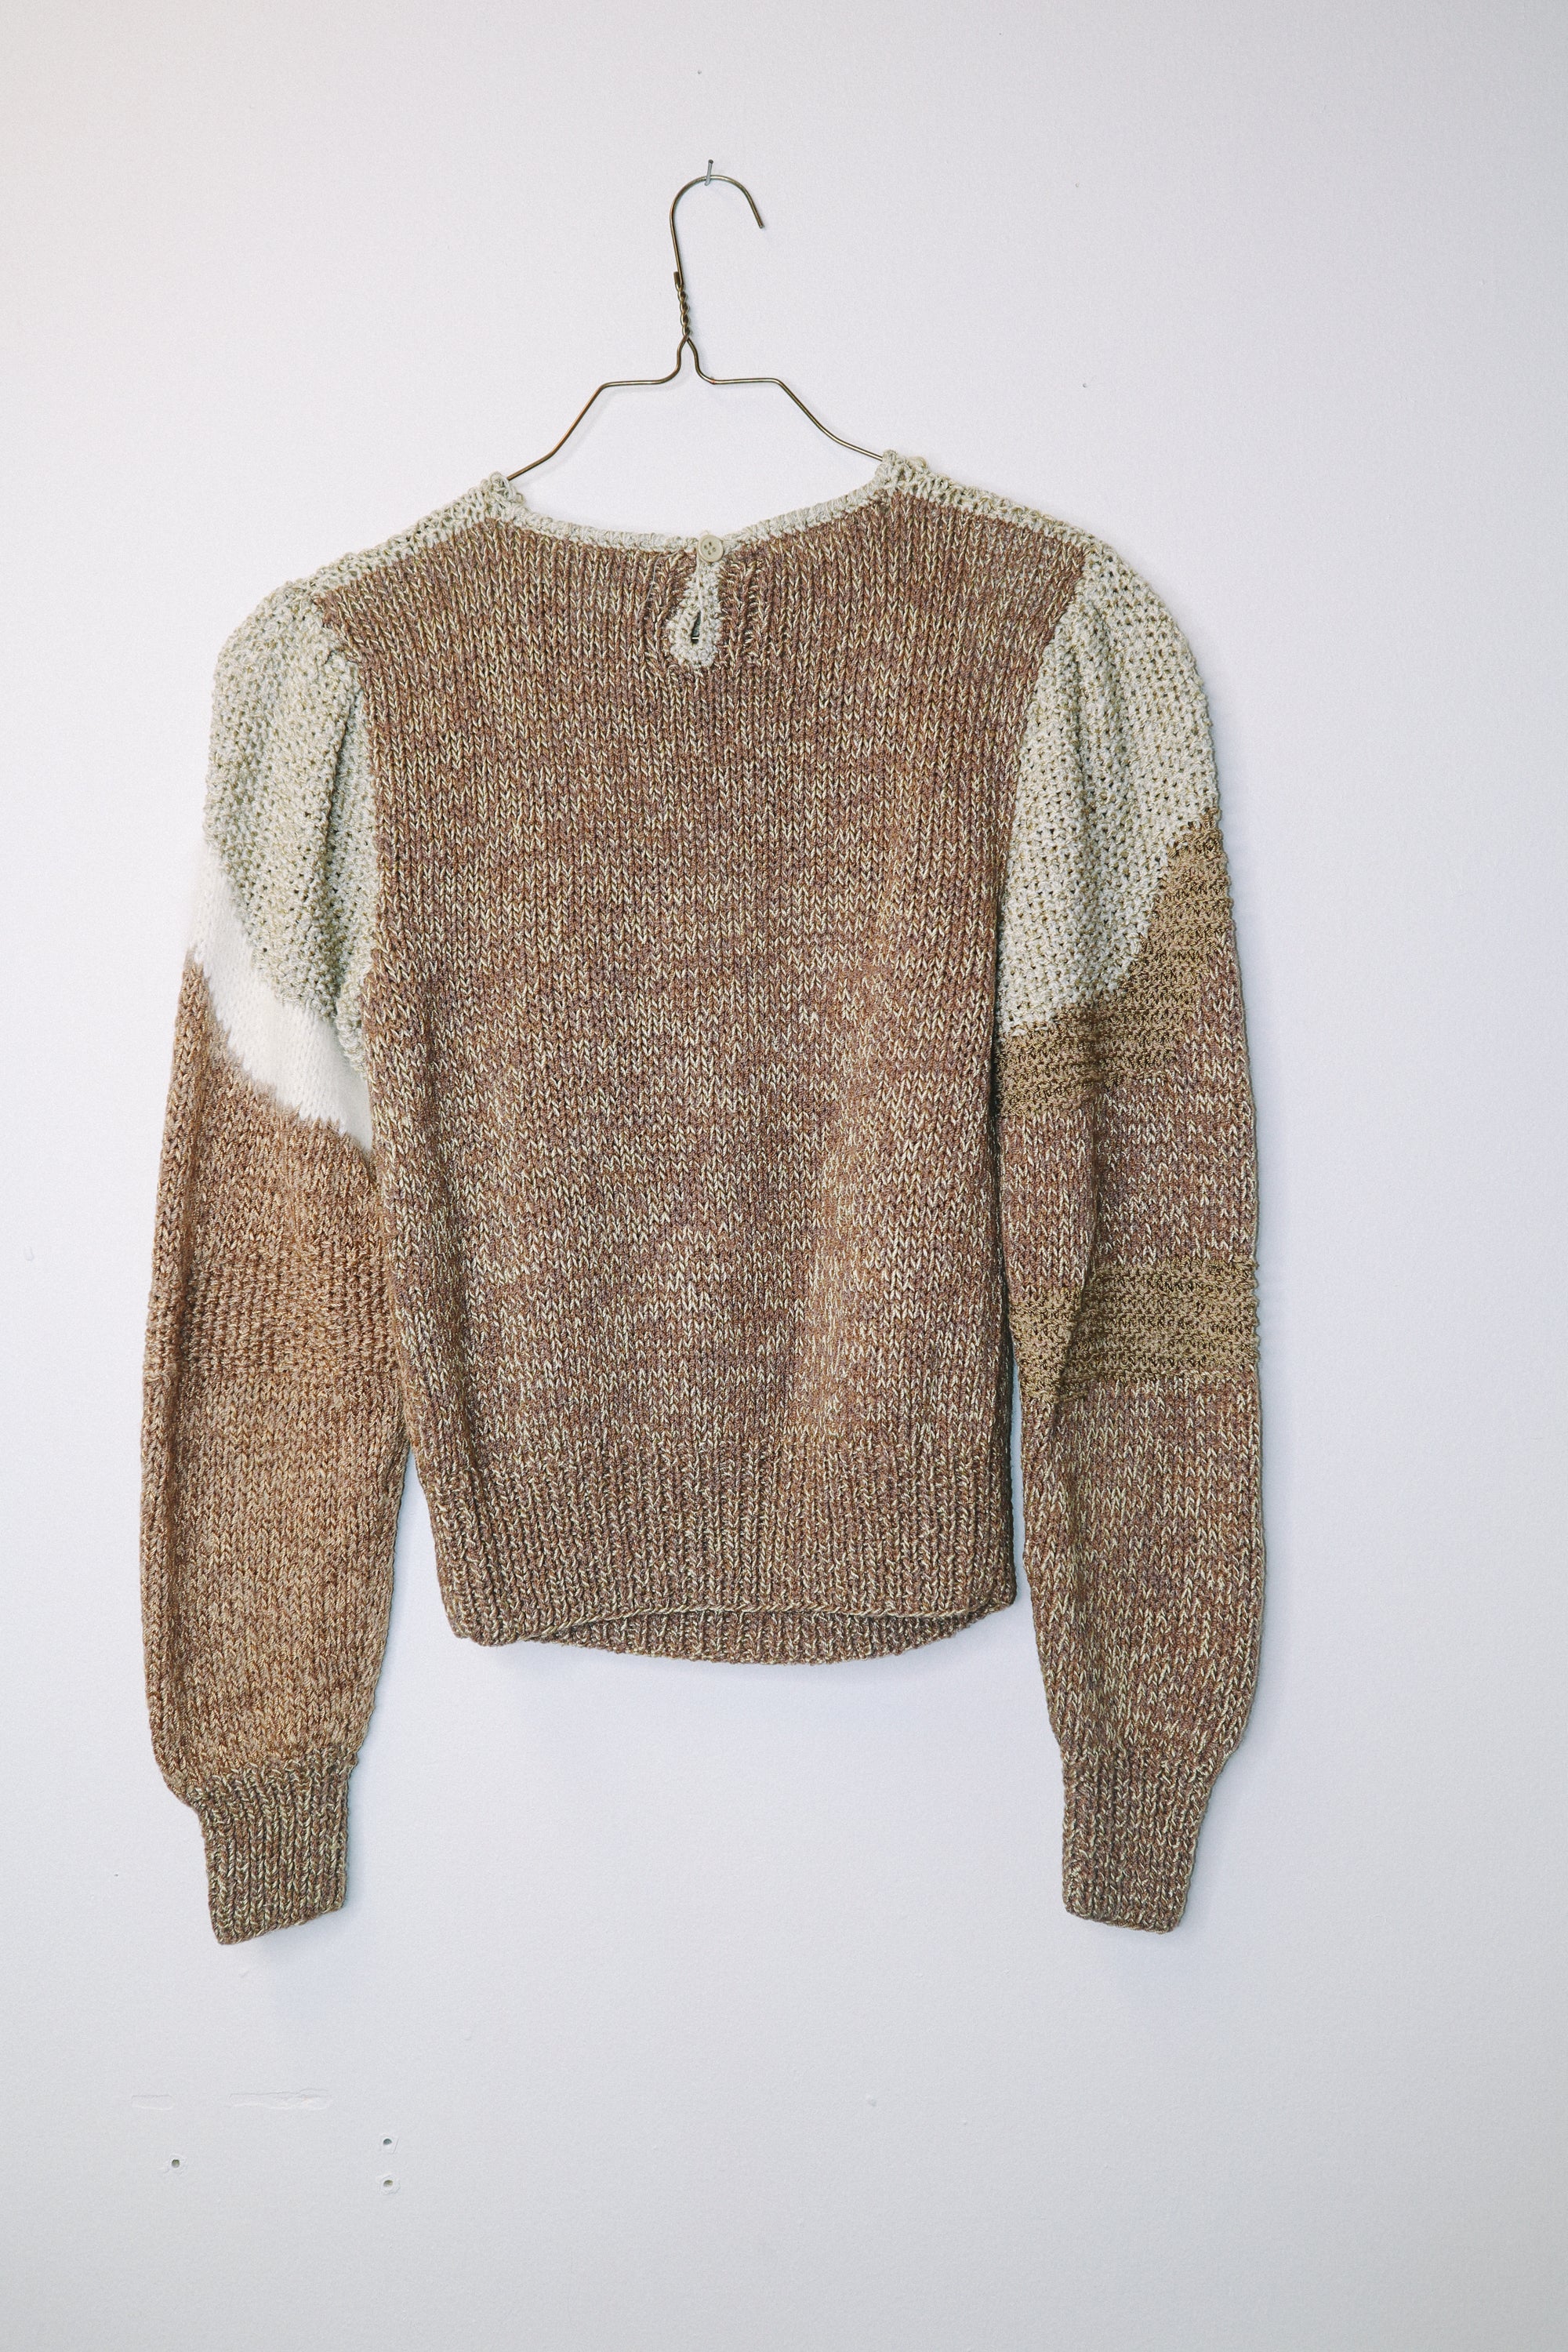 Vintage 70s/80s Beige And Ivory Angora Wool Abstract Knit Sweater By ...